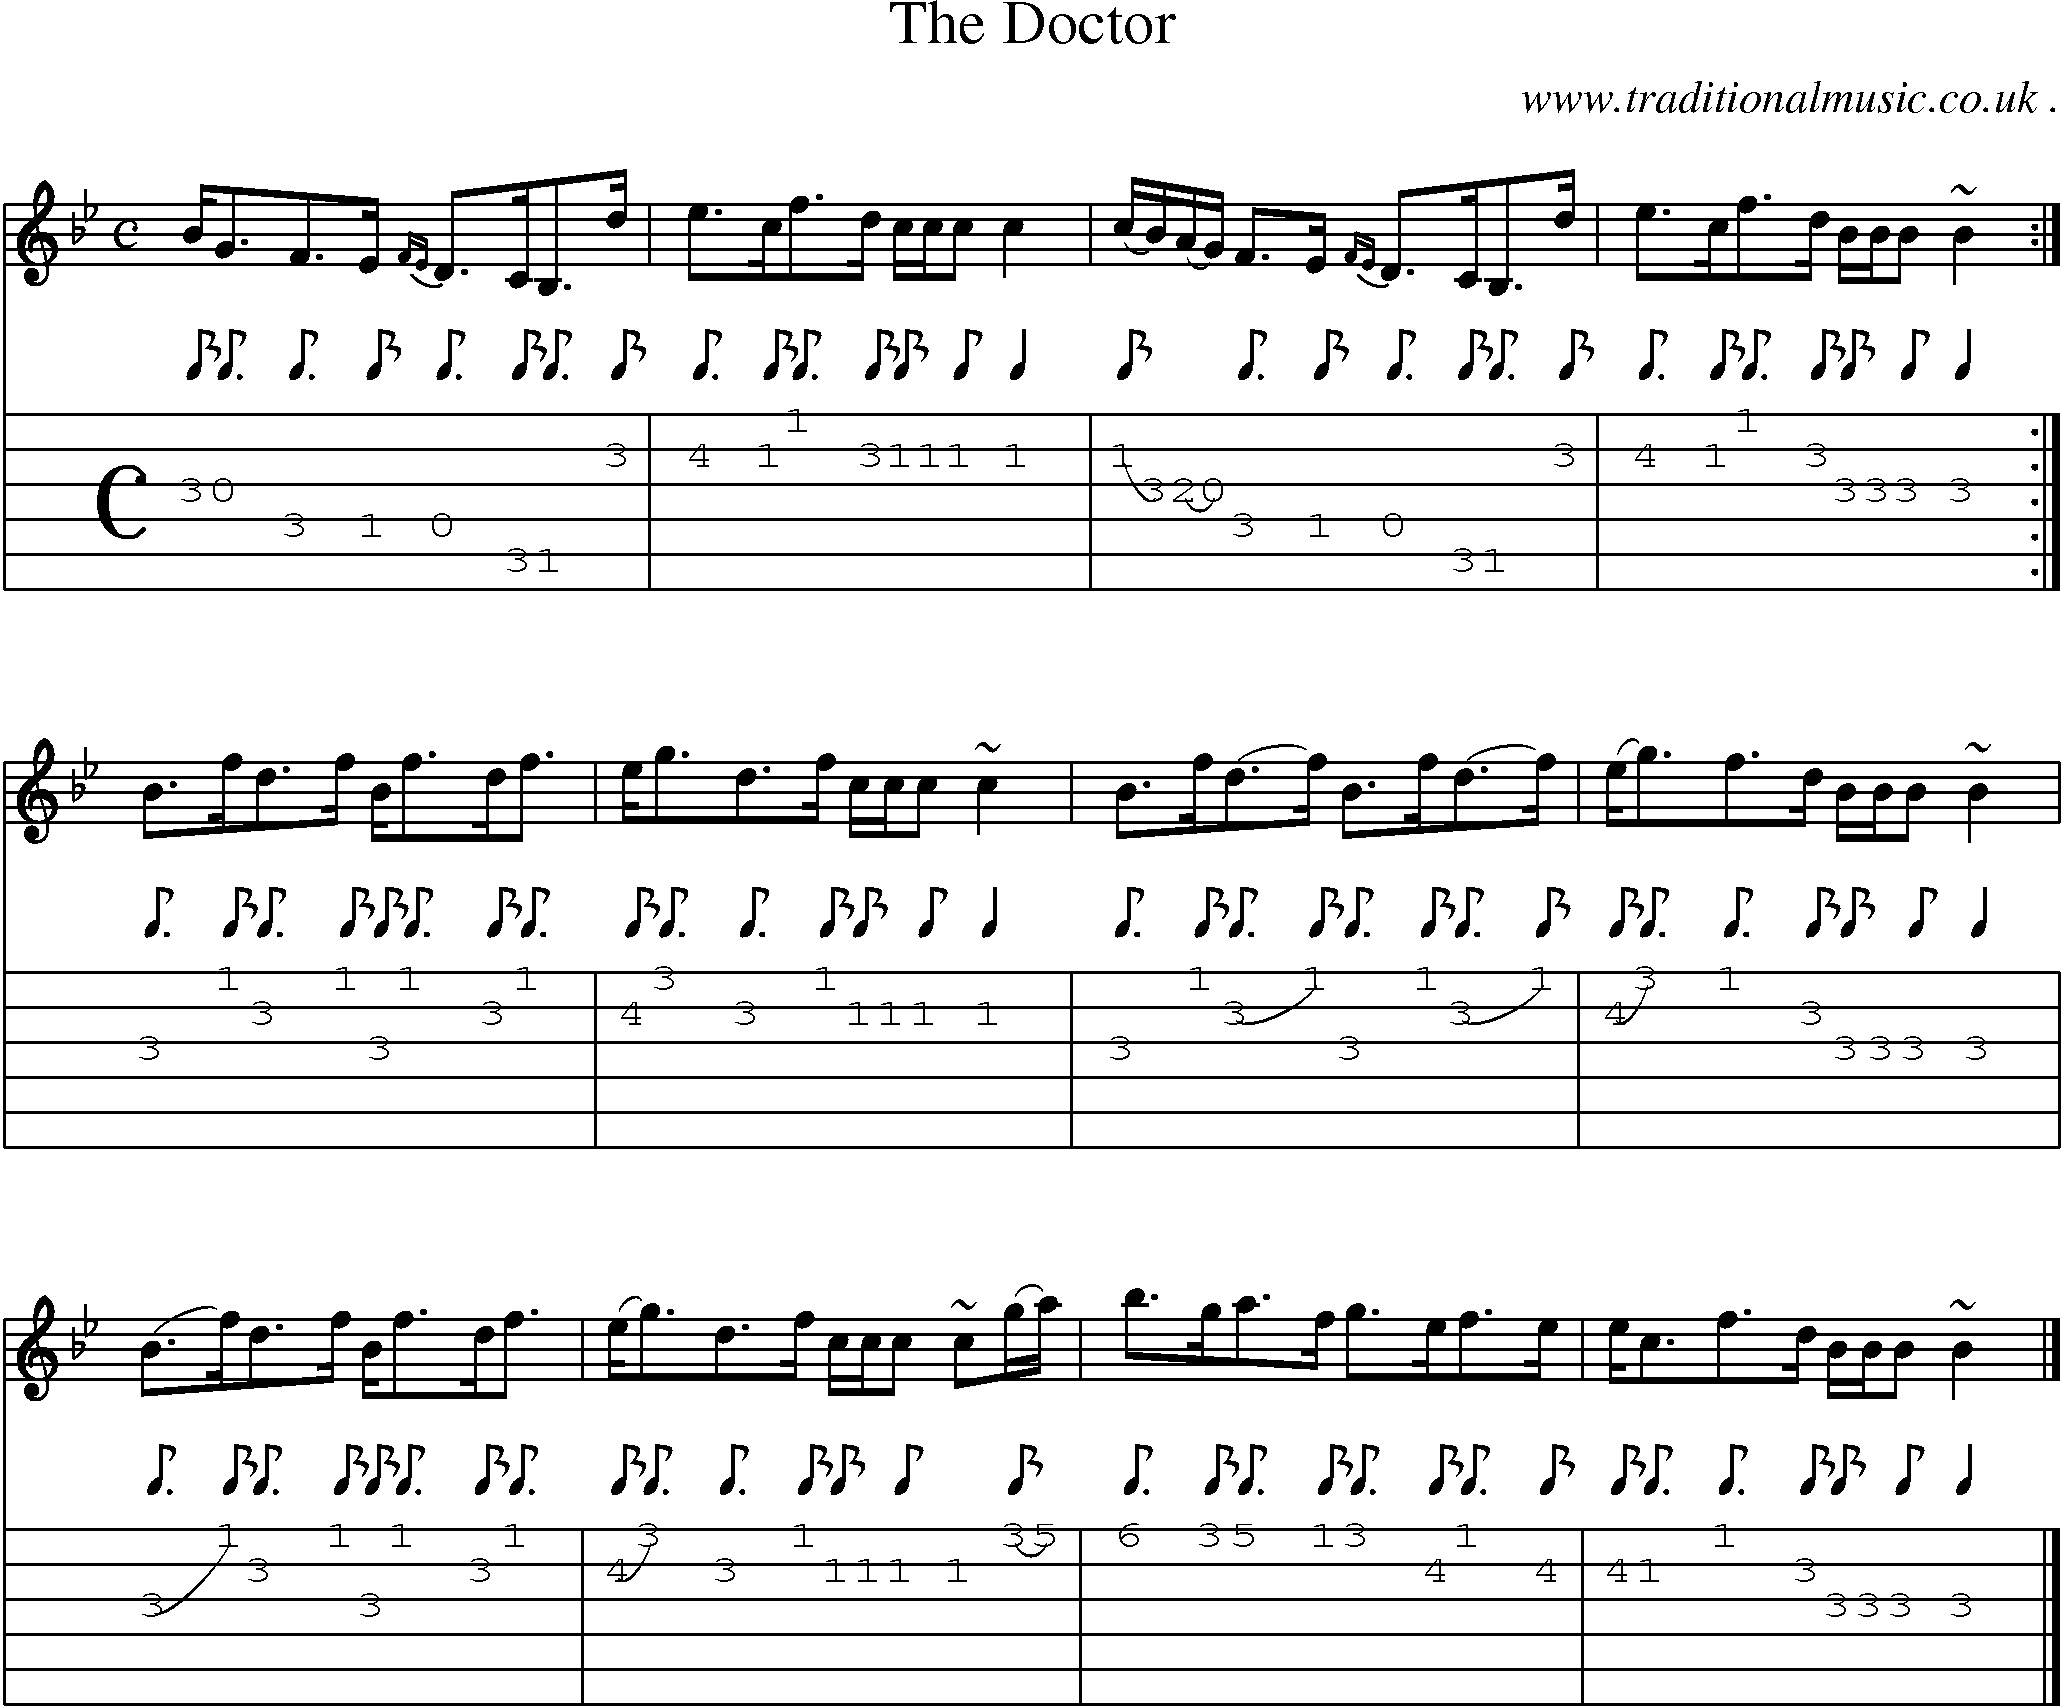 Sheet-music  score, Chords and Guitar Tabs for The Doctor